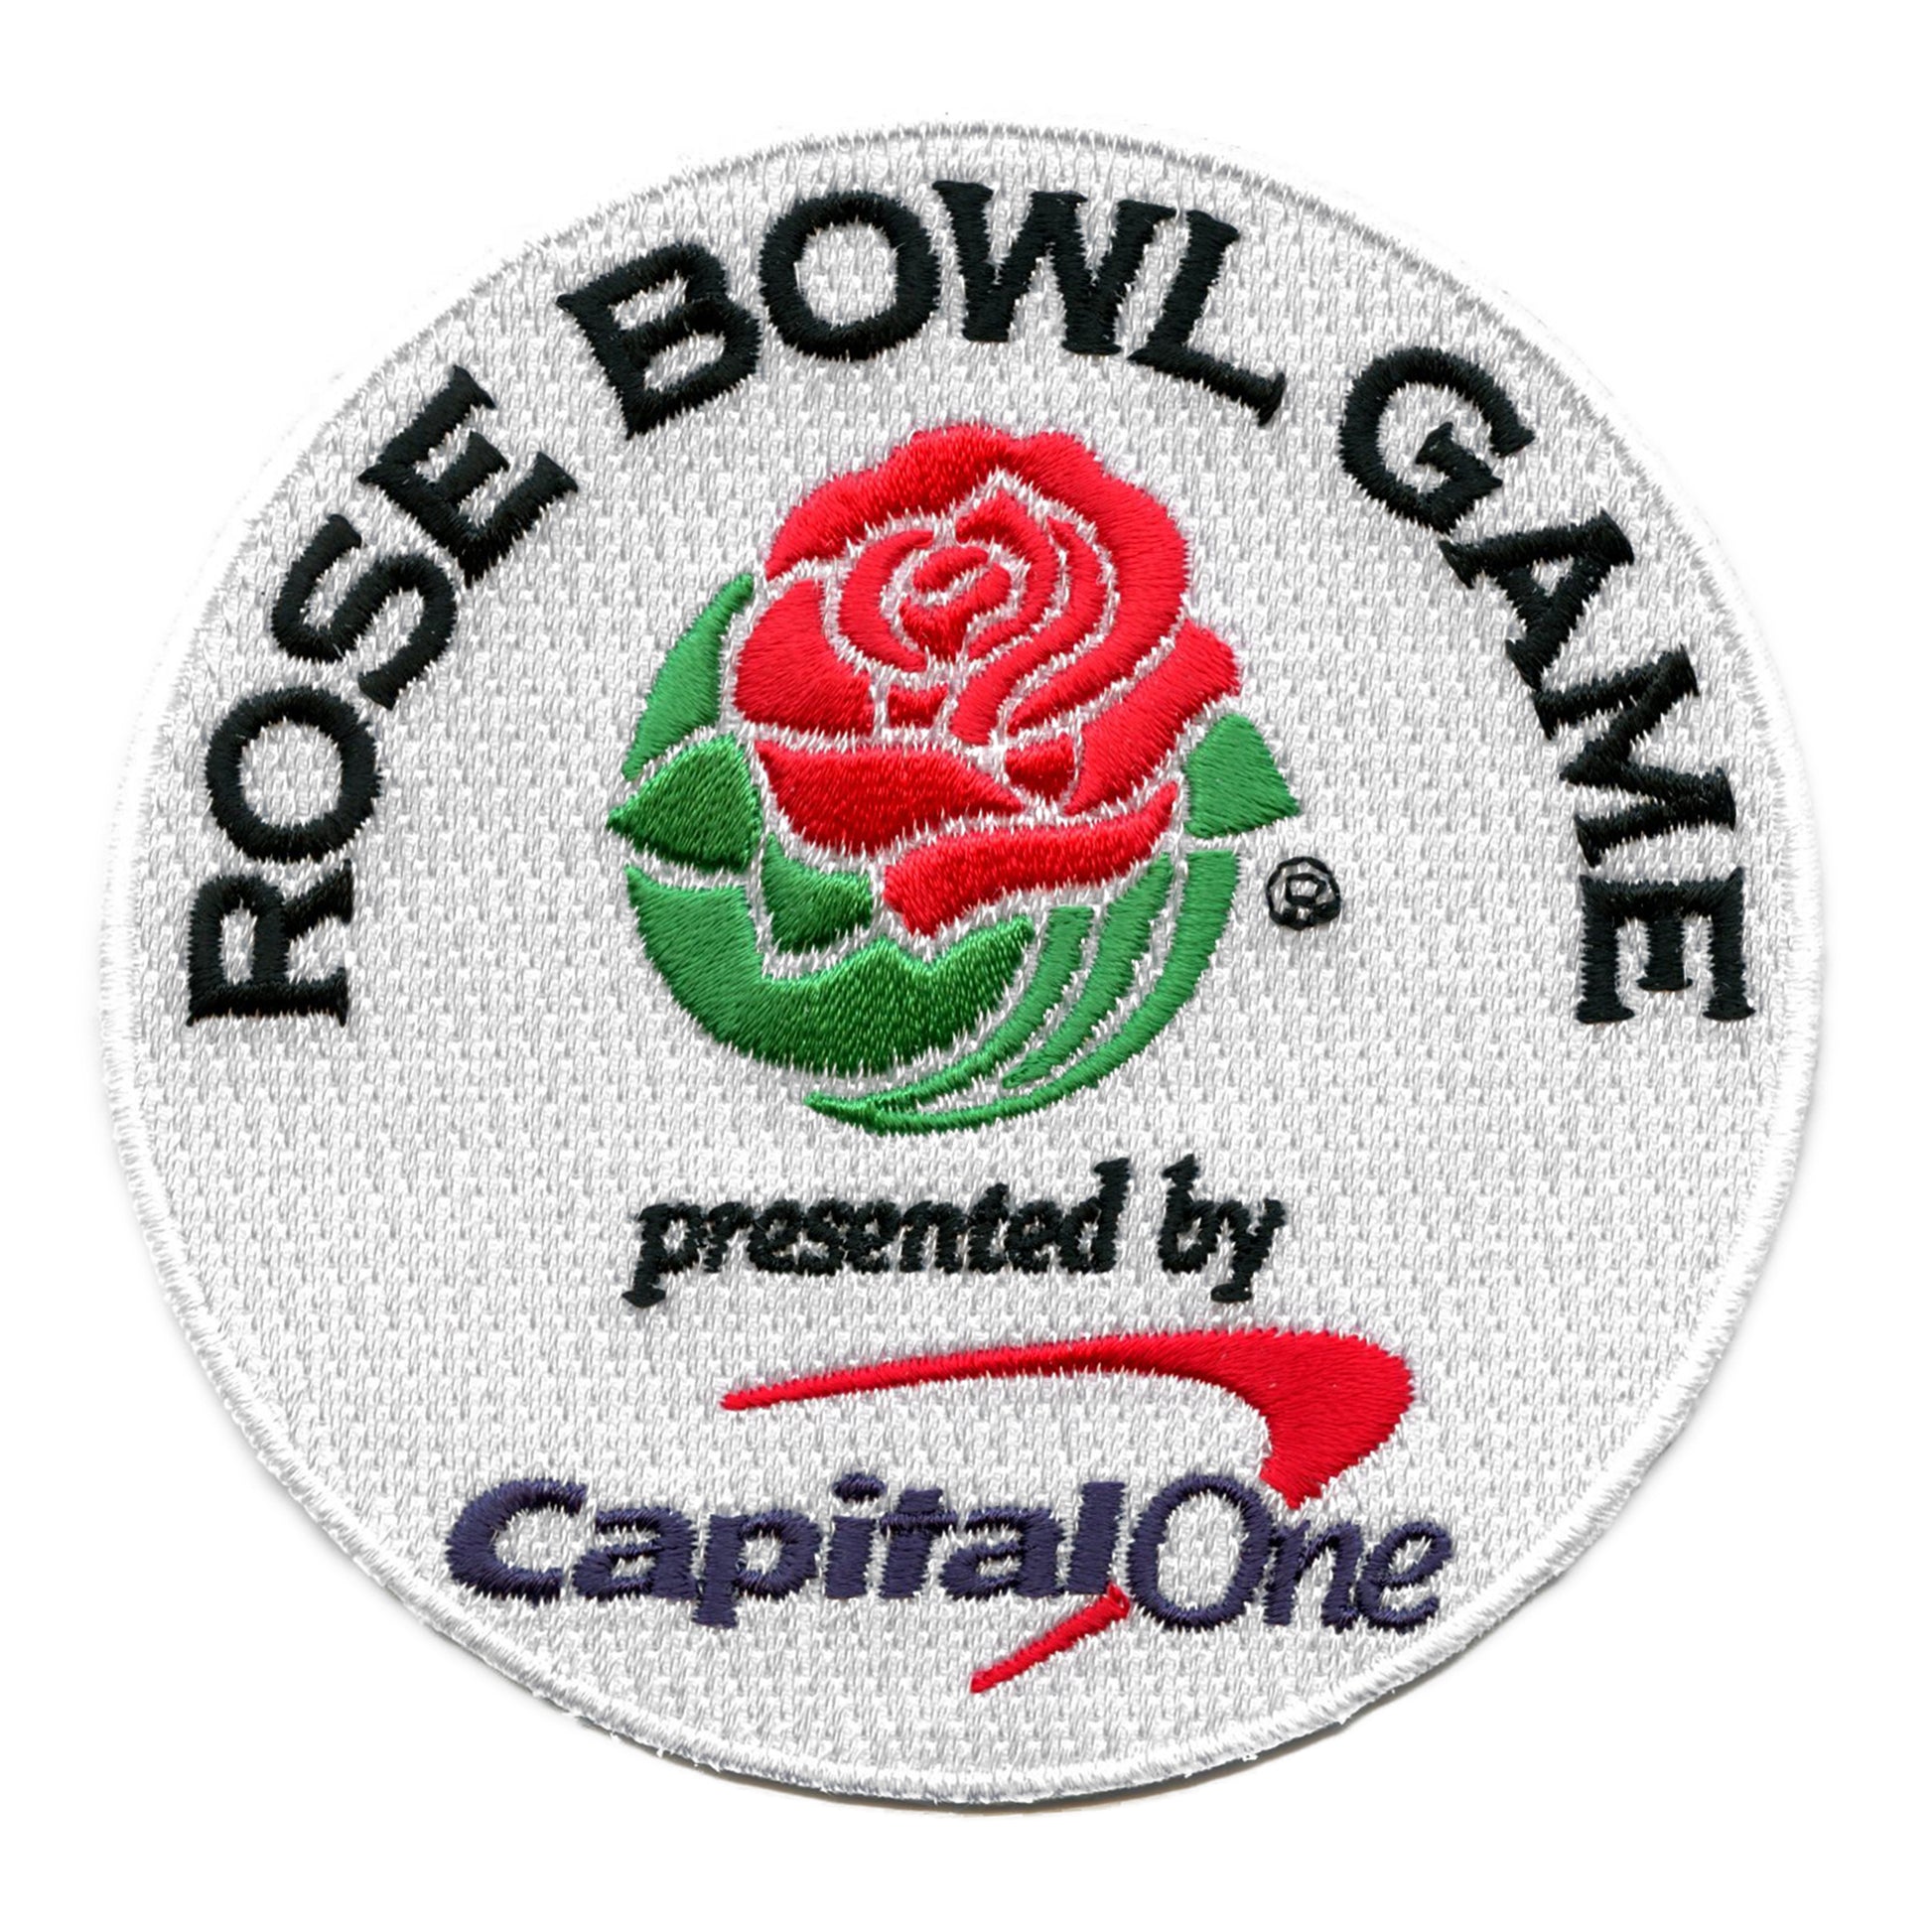 Penn State To Wear Simpler Patch In Rose Bowl